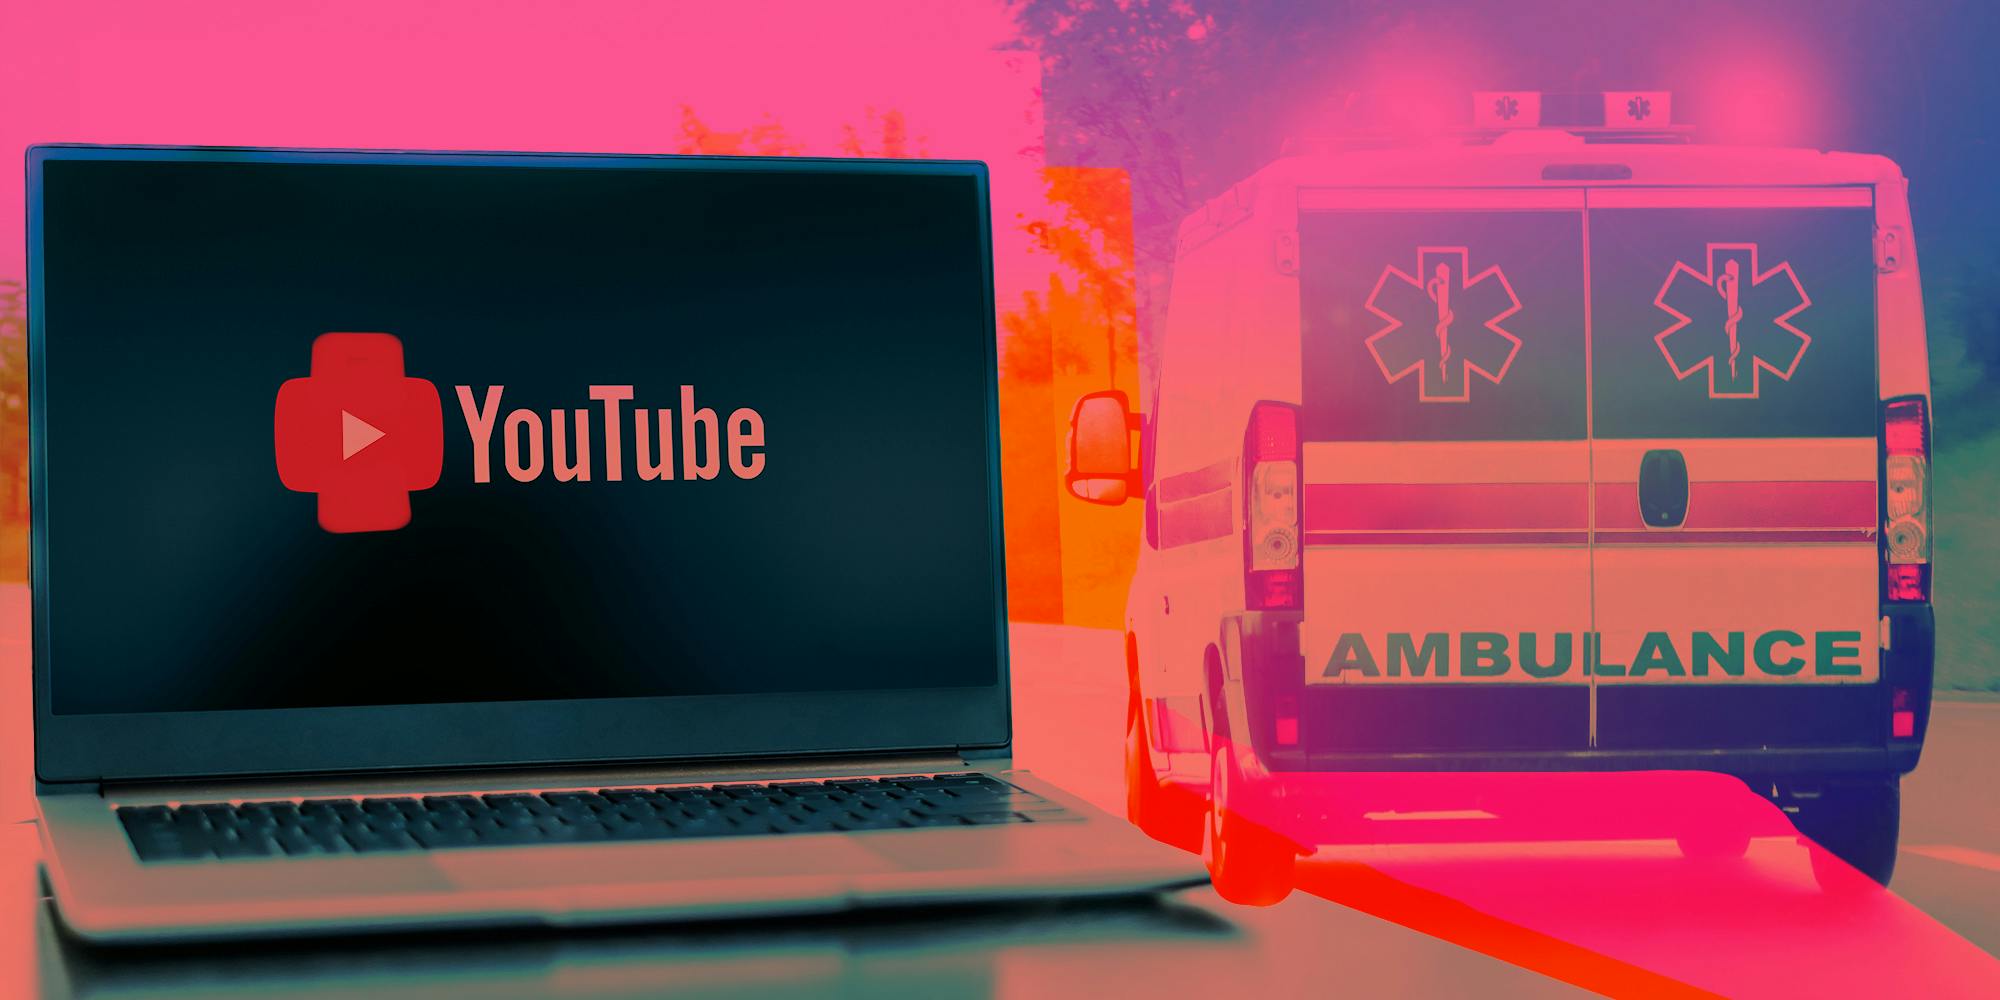 Computer with youtube superimposed over ambulance on road